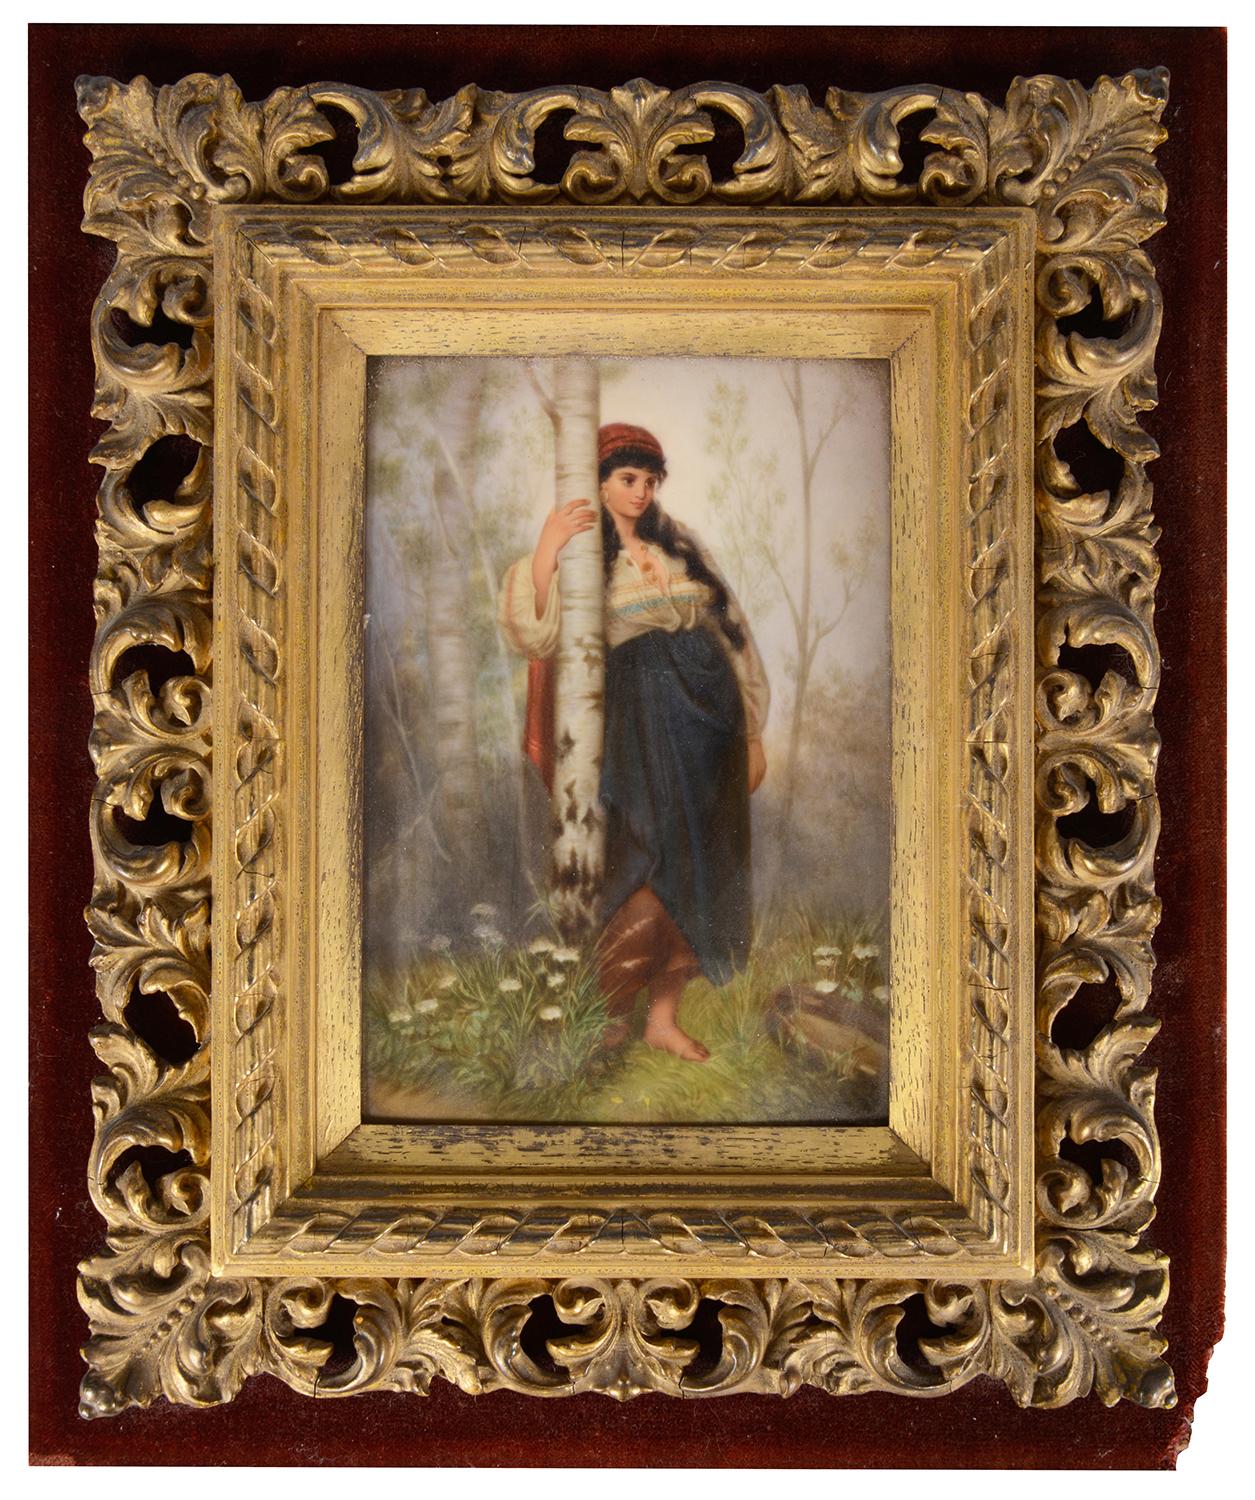 A fine quality pair of 19th Century Austrian, KPM porcelain plaques, each depicting pretty young maidens under a tree, mounted in carved scrolling gilt wood frames, set on a velvet backing.